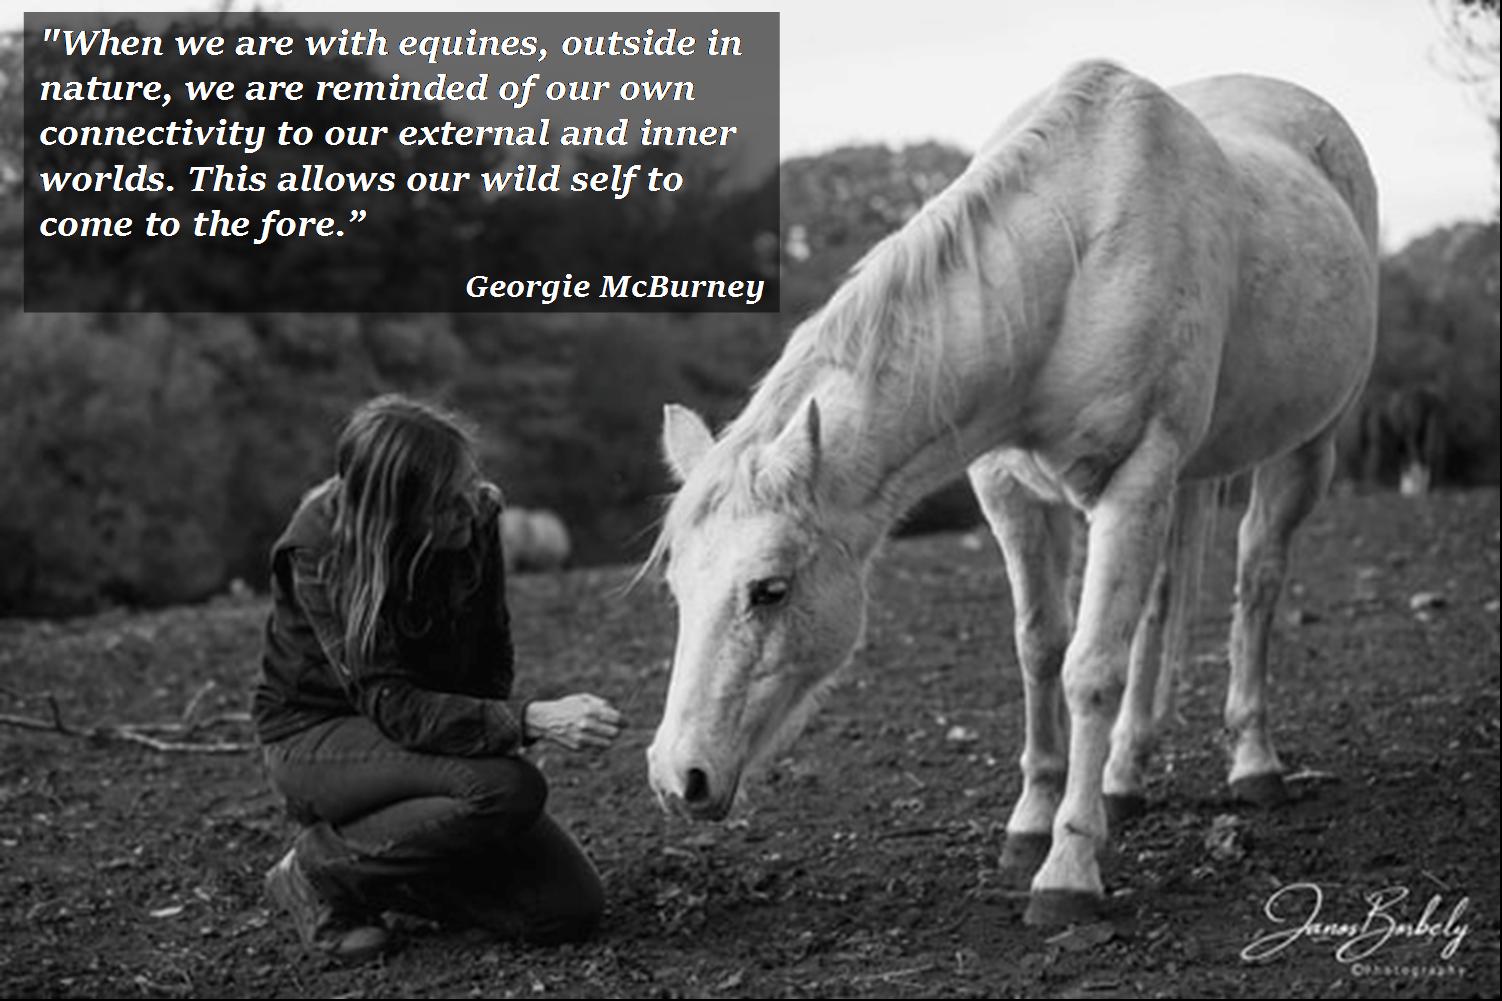 Equine, Counselling, Equine Leadership, Author Interview